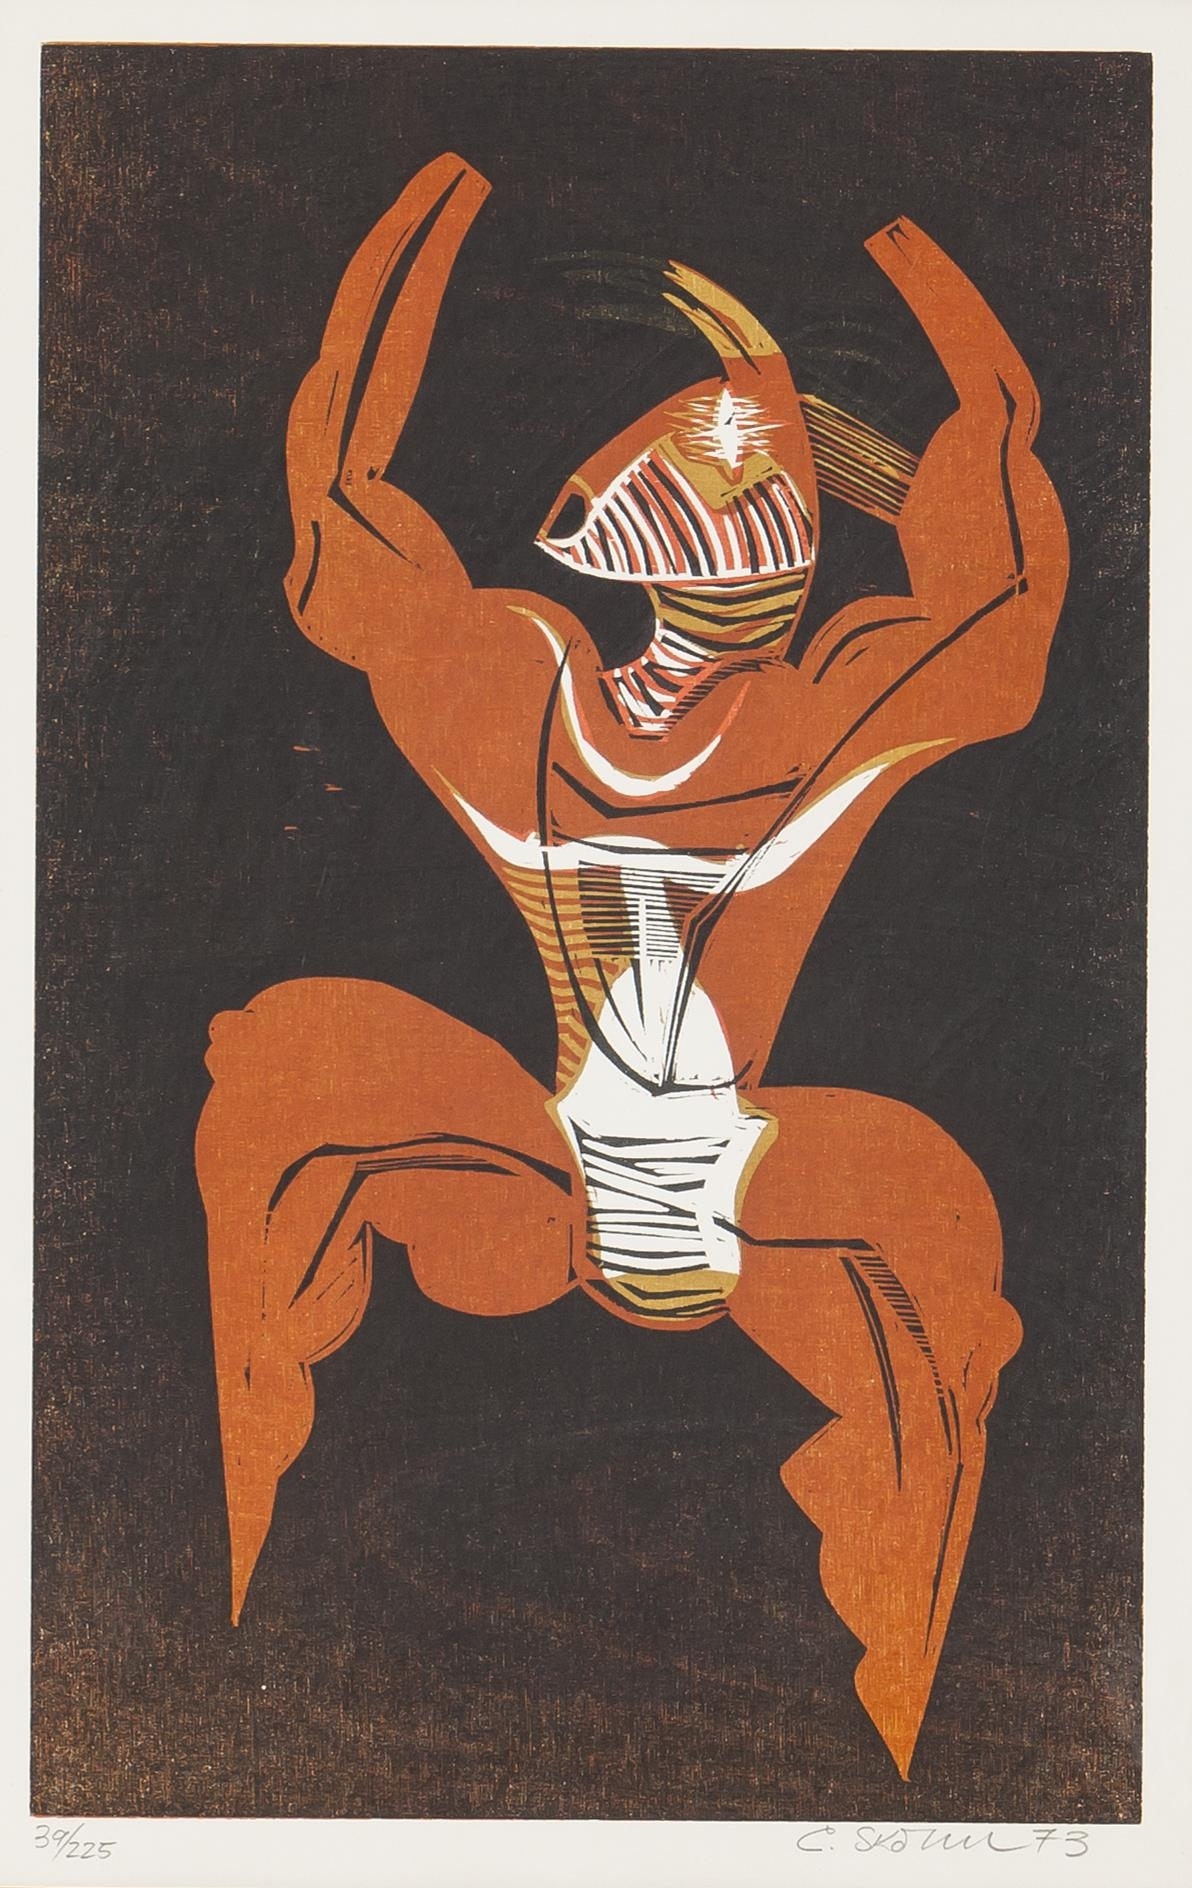 Artwork by Cecil Skotnes, SHAKA'S VICTORY, Made of woodcut